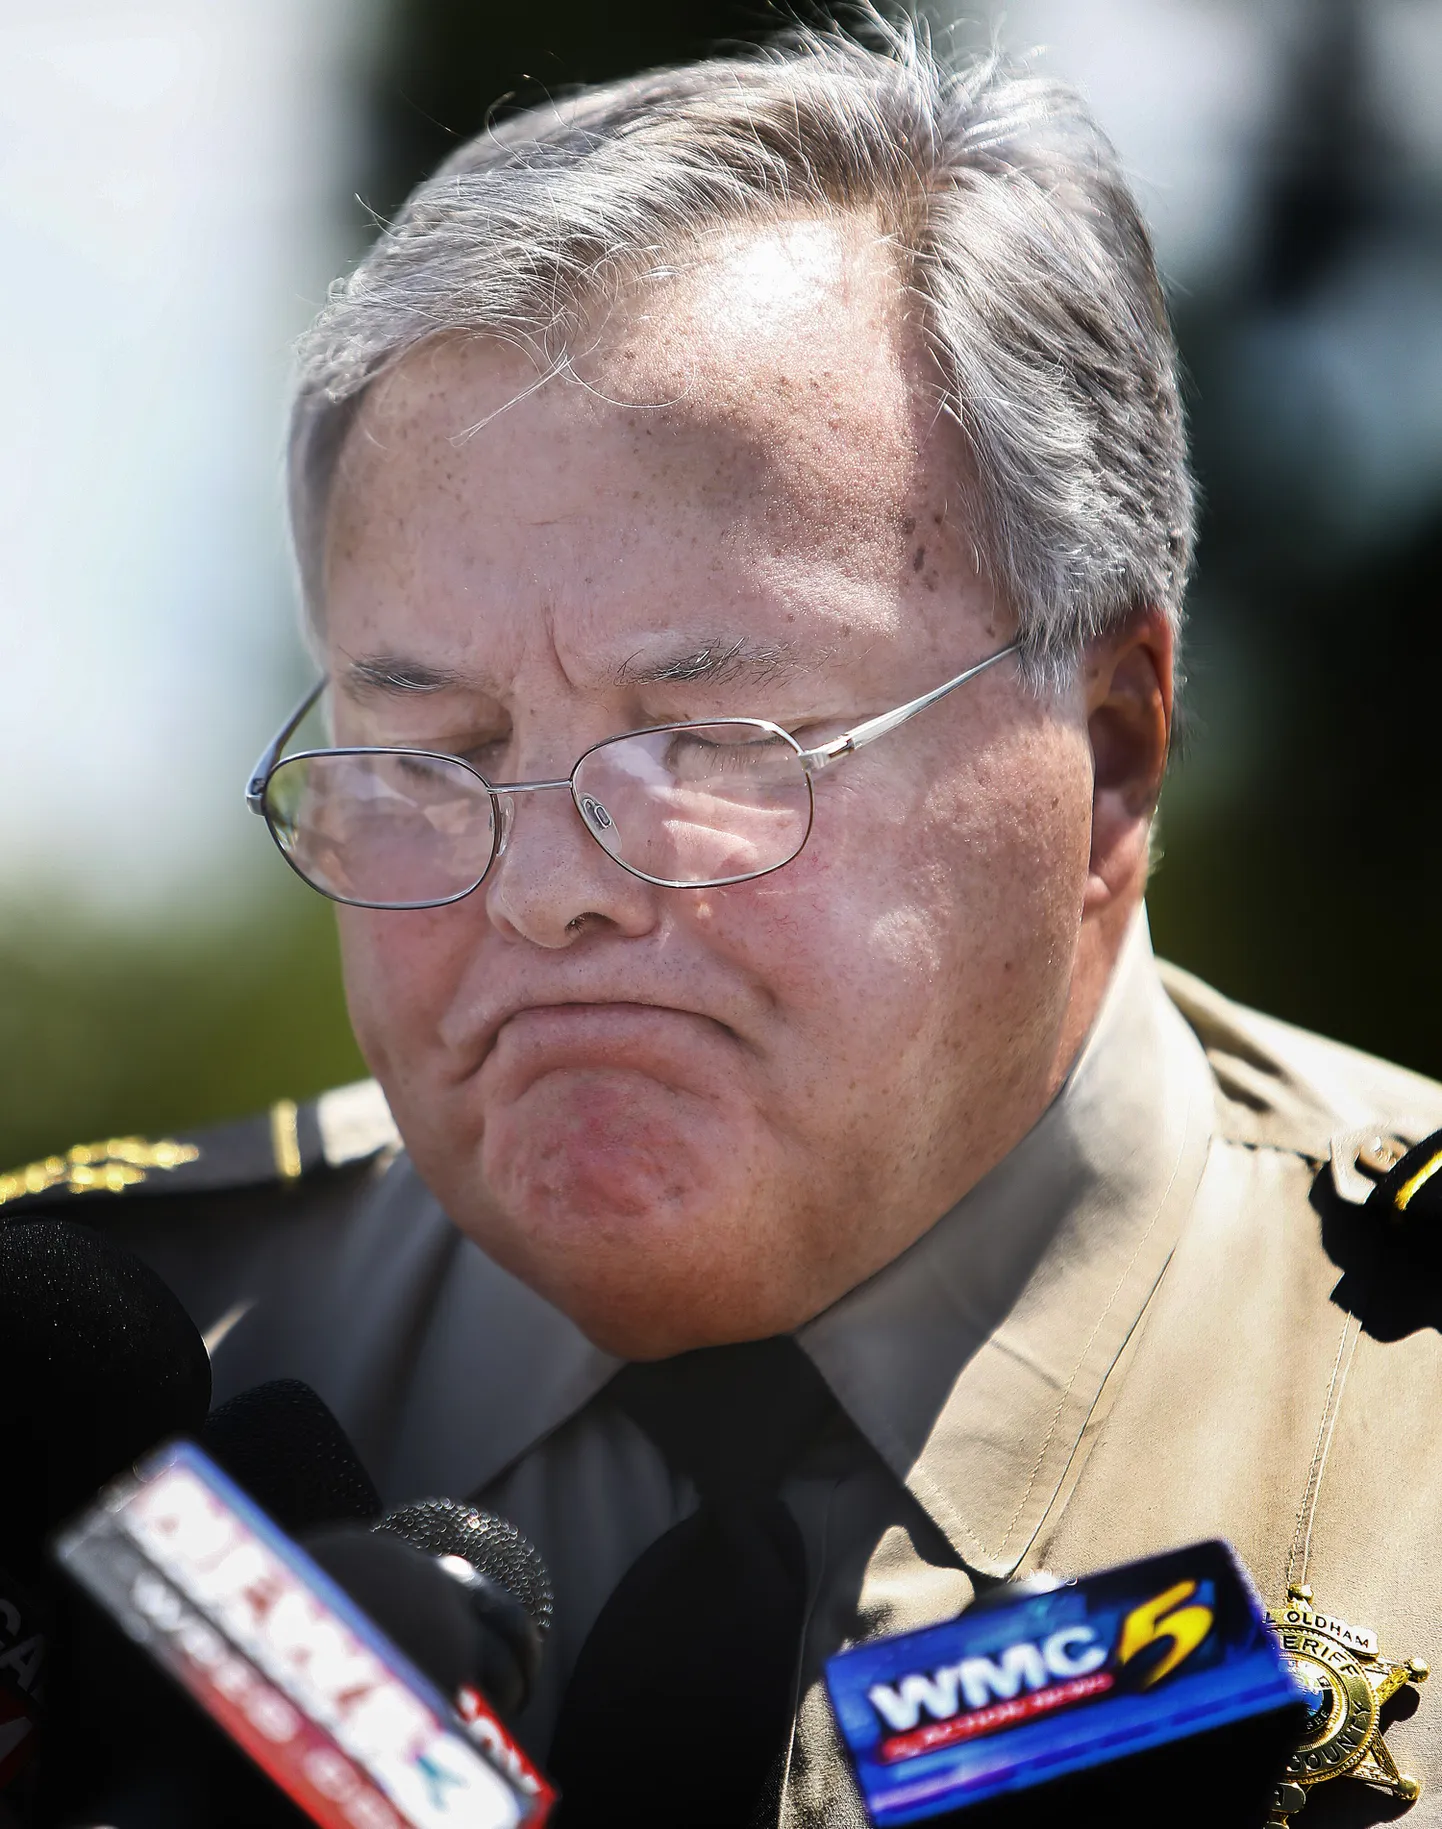 Shelby County Sheriff Bill Oldham talks to reporters Friday, July 1, 2016, about the stabbing deaths of four children in suburban Memphis, Tenn. "This is an egregious act of evil that has shocked us to our core," Oldham said. "I will never understand how anyone can do this." (Mark Weber/The Commercial Appeal via AP)